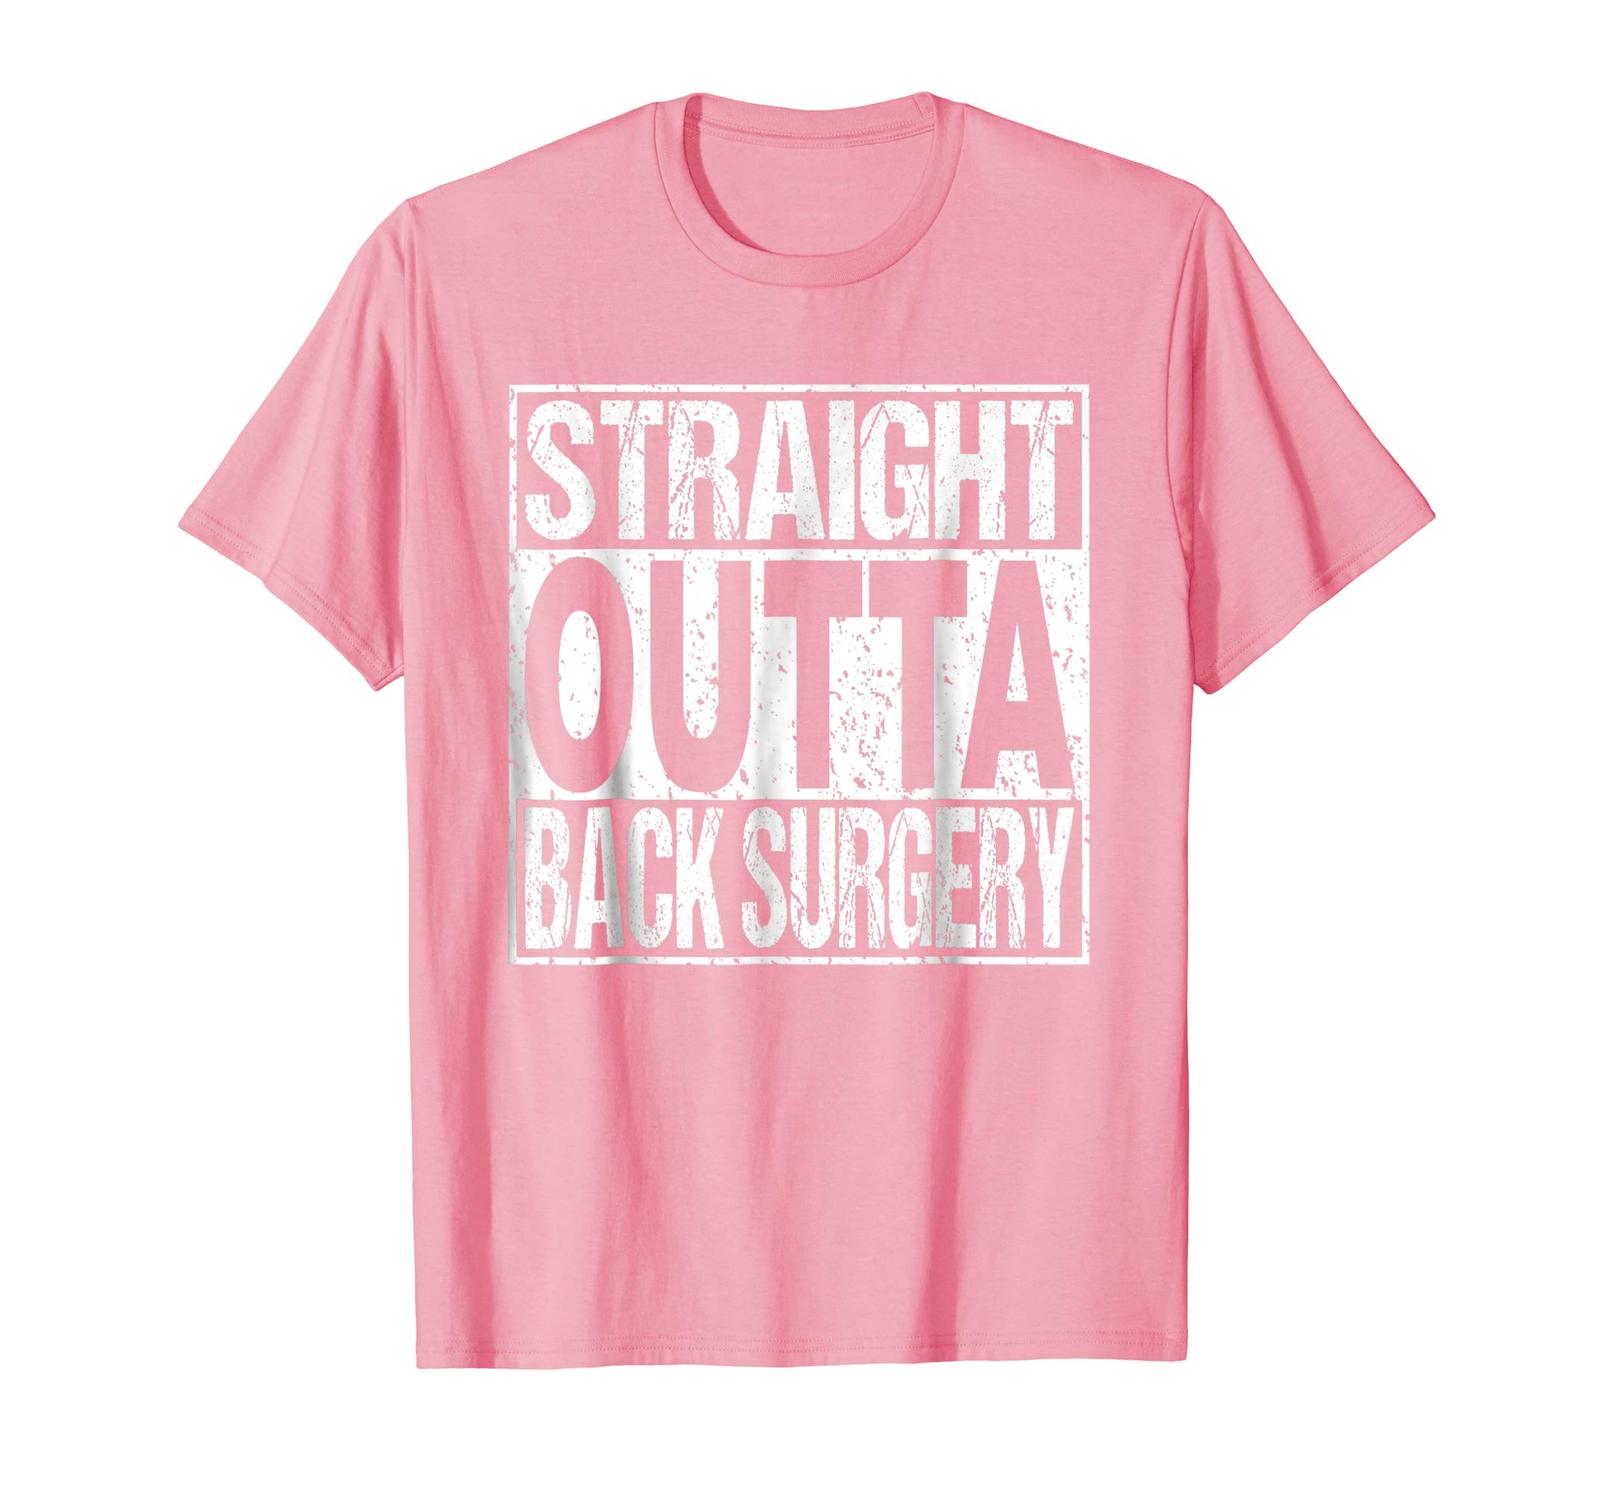 New Shirts - Back Surgery TShirt Lumbar Spinal Fusion Spine Recovery ...